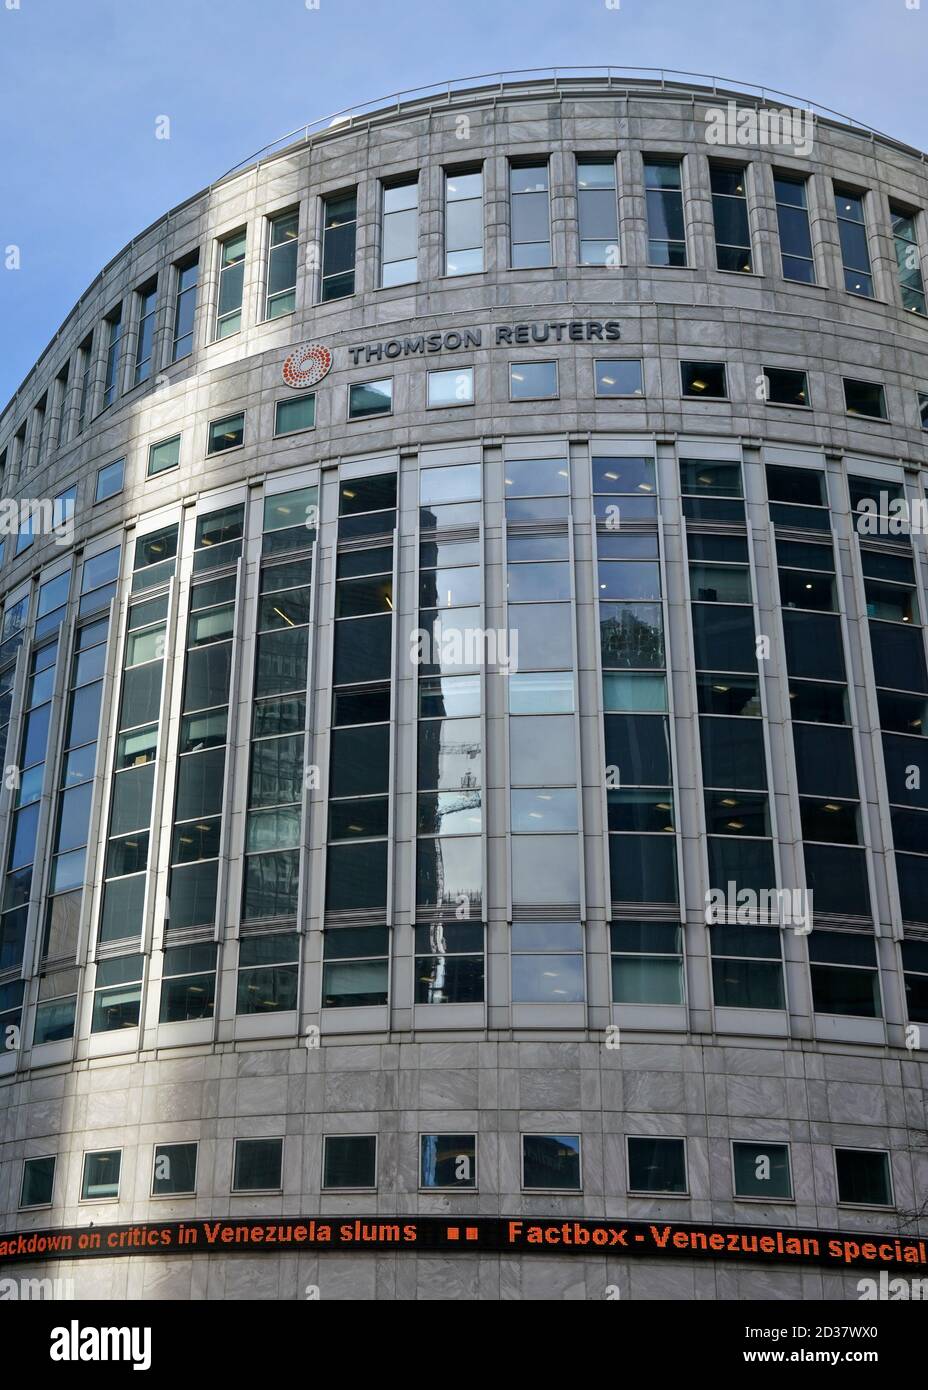 London, United Kingdom - February 03, 2019: Sun shines on Thomson Reuters offices building at Canary Wharf in UK capital. TR Group is Canadian multina Stock Photo